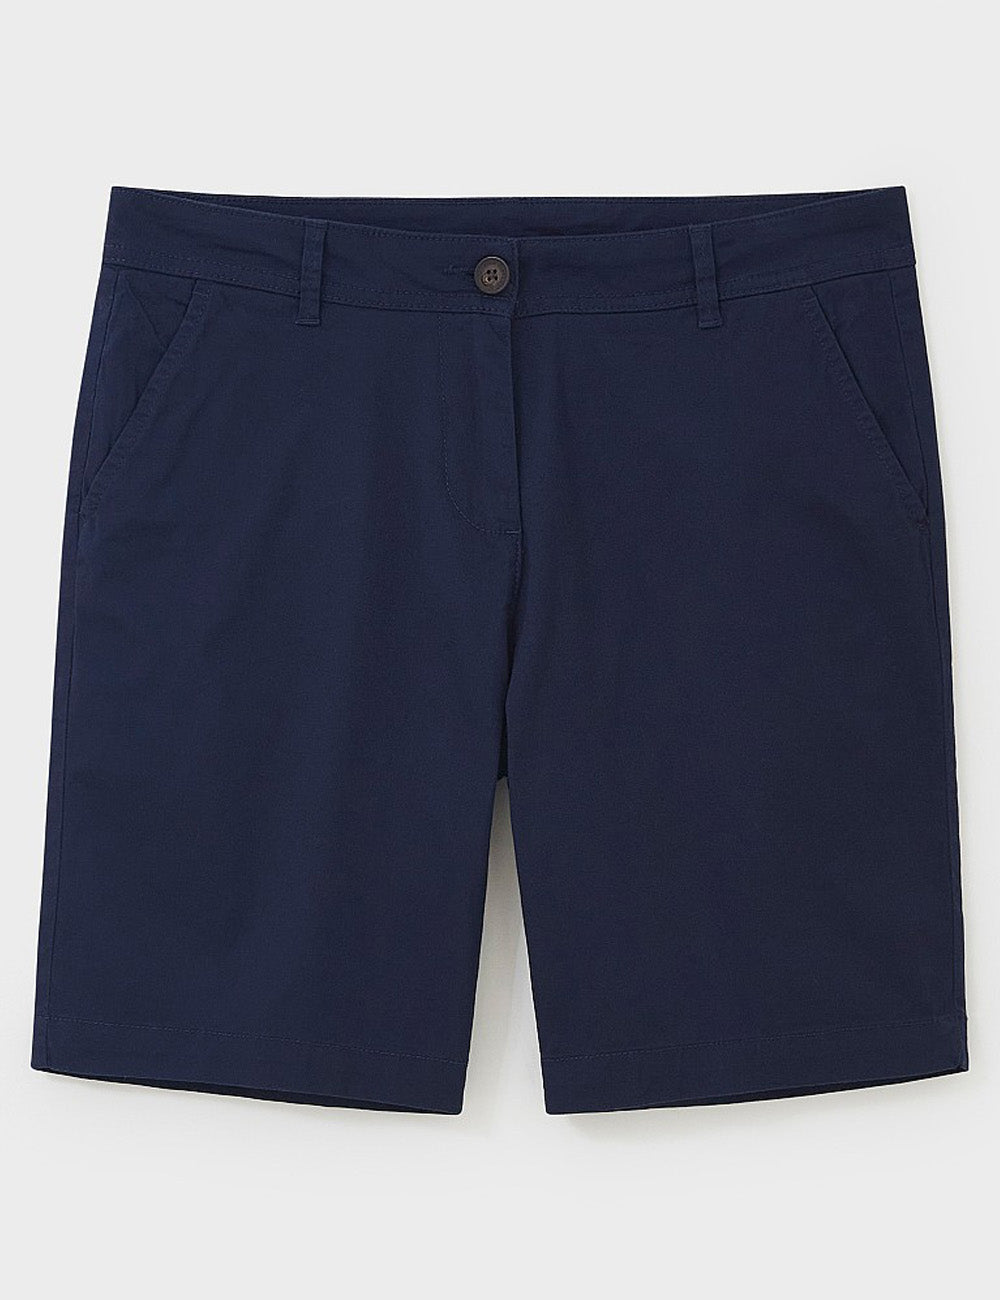 Crew Clothing's Chino Shorts in Navy on a grey background